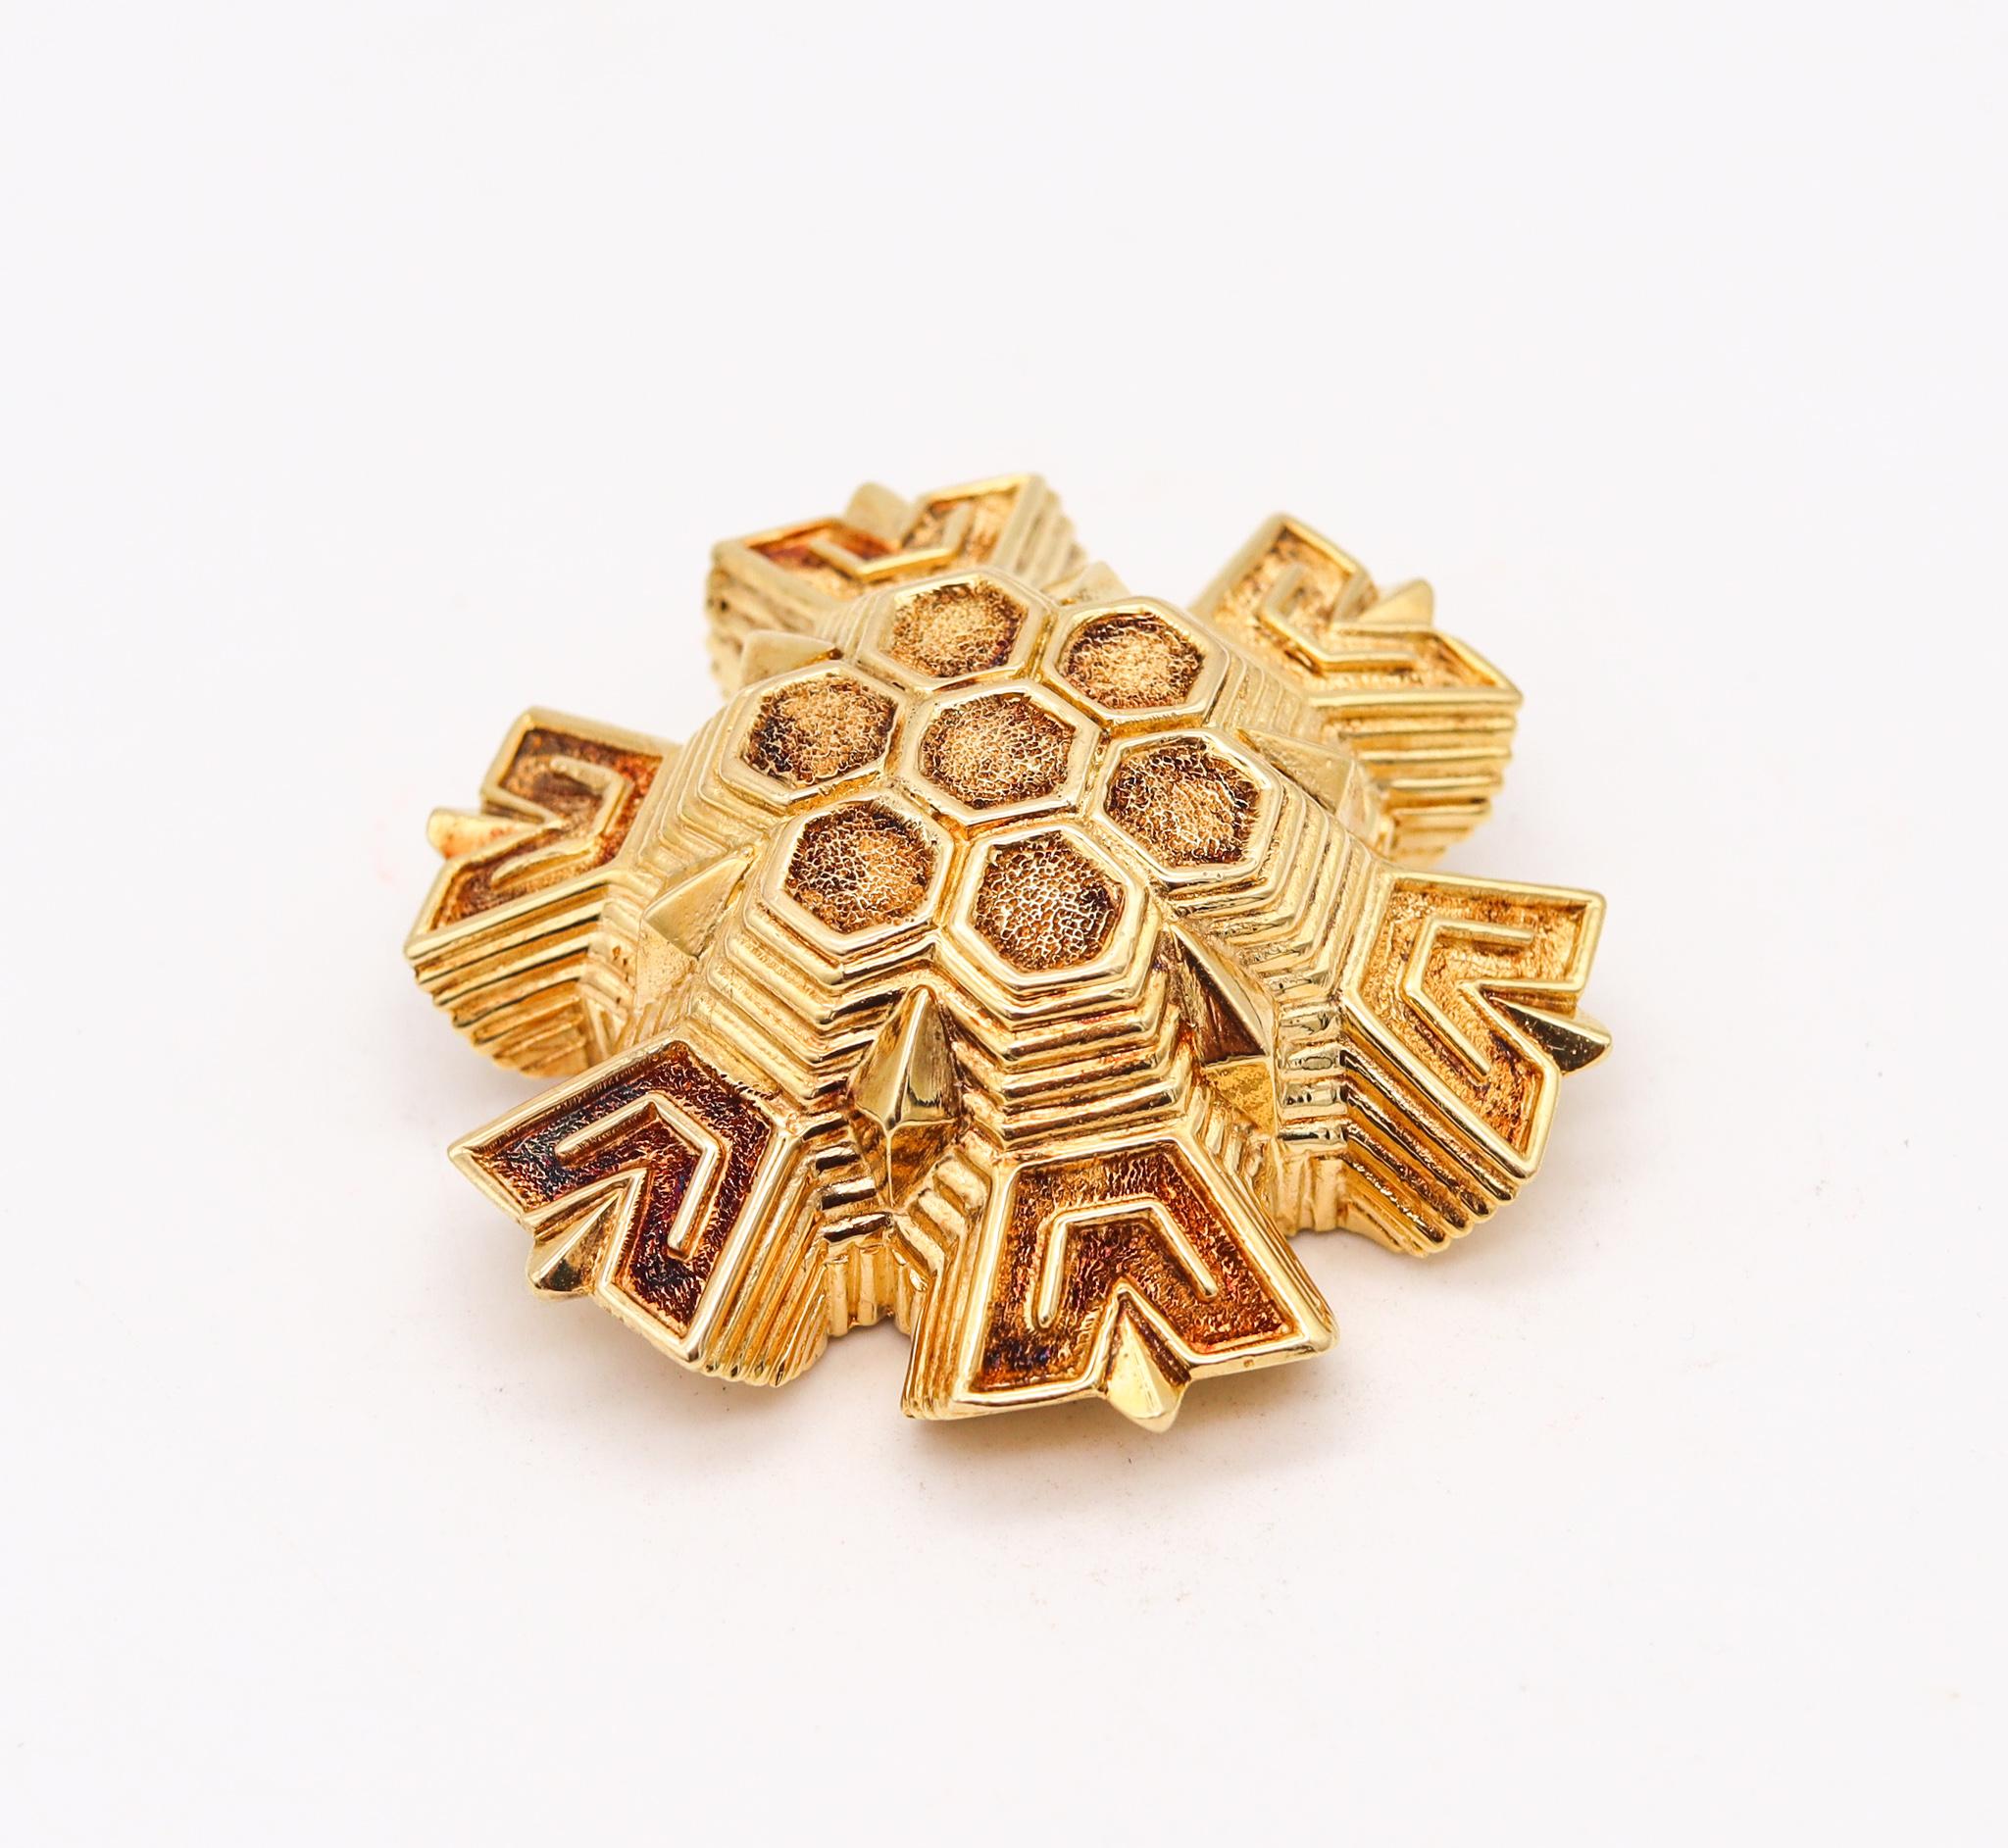 Tiffany & Co 1971 by Sonia Younis Rare Pendant Brooch in Solid 18Kt Yellow Gold In Excellent Condition For Sale In Miami, FL